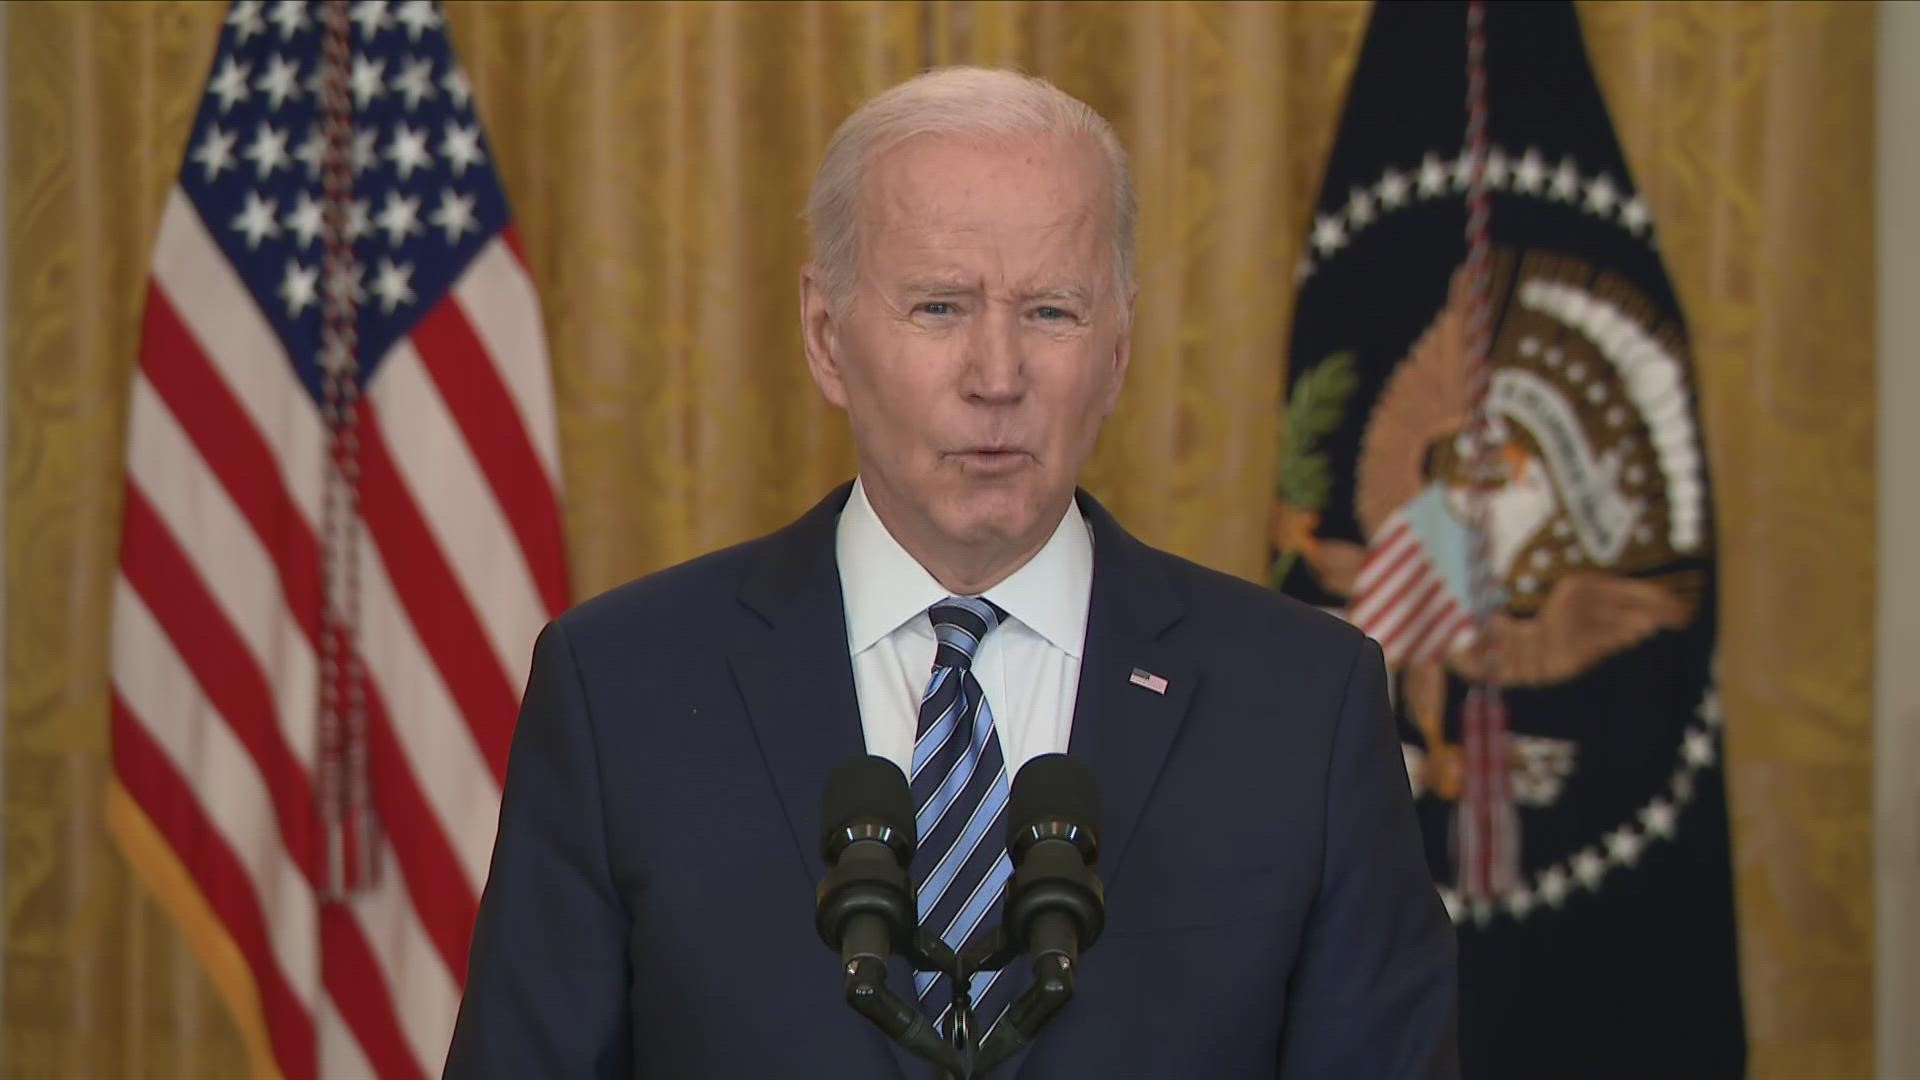 Biden said sanctions implemented by the U.S. and its allies have already shown impacts on Russia's economy.